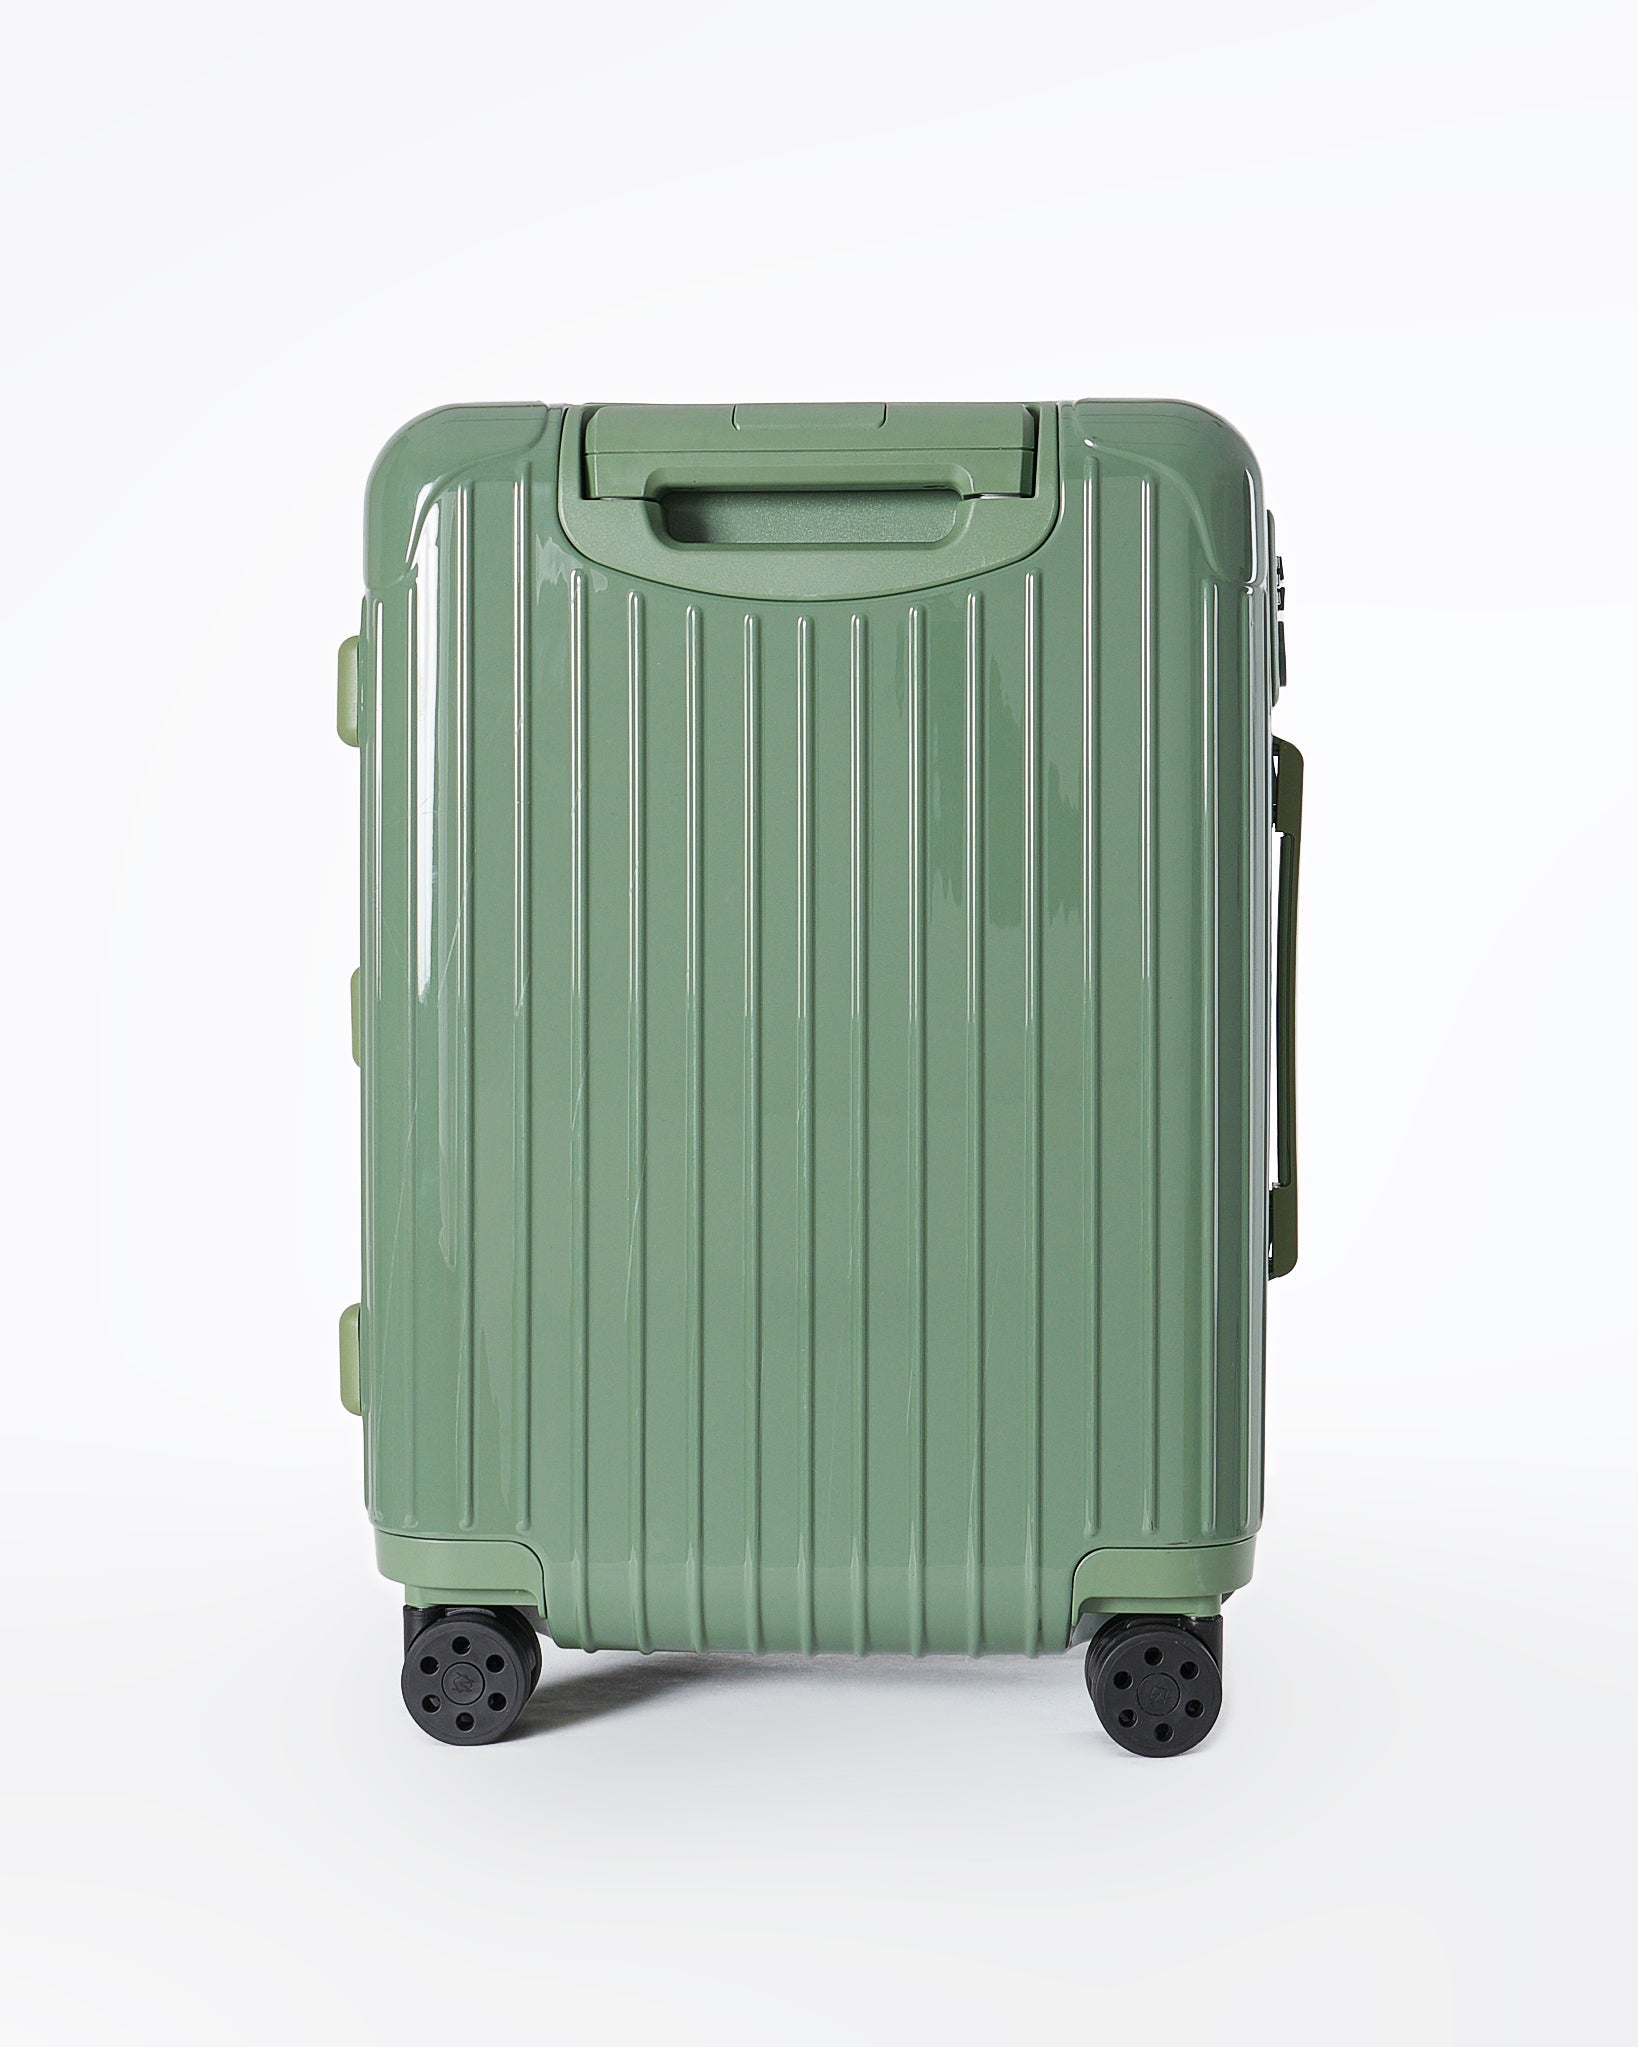 MOI OUTFIT-Solid Color Cabin Size Luggage 159.90